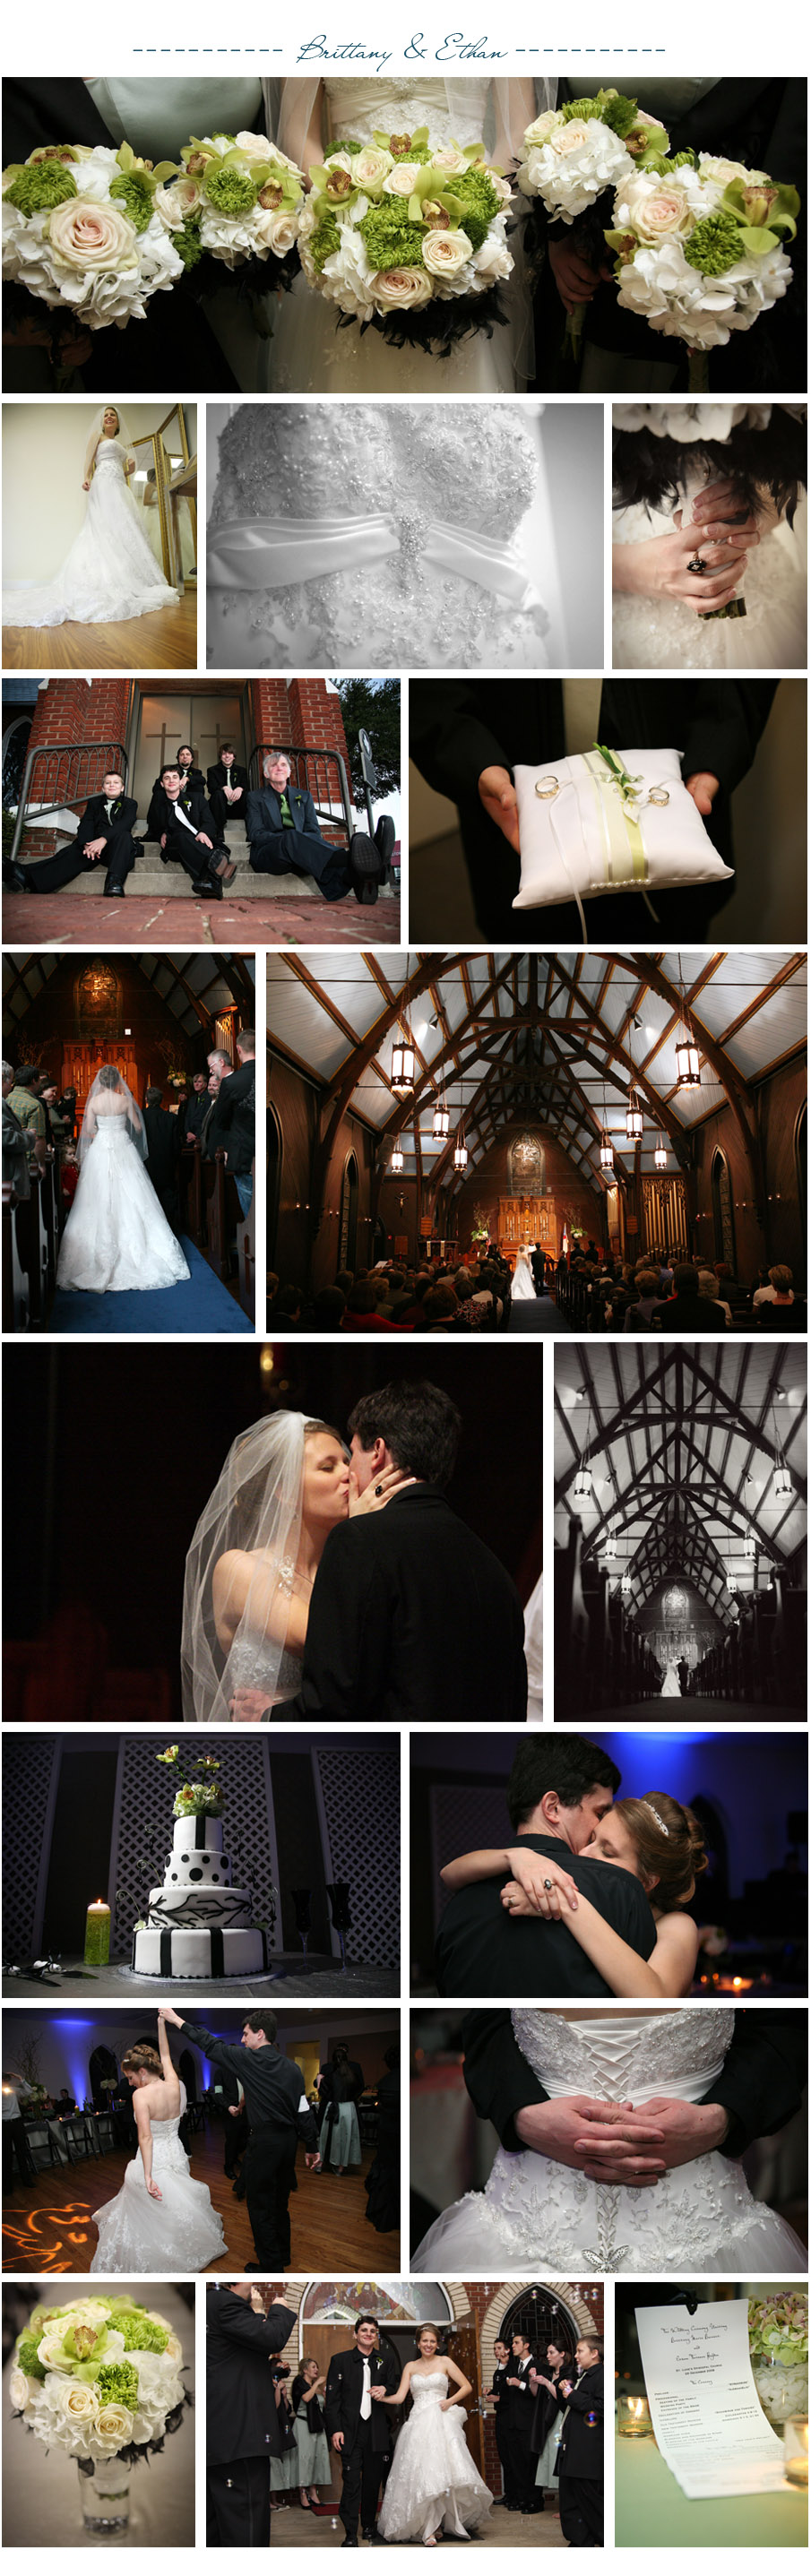 Brittany and Ethan's Tim Burton inspired wedding at St. Lukes in Denison Texas photographed by McKinney Wedding Photographer Phase 3 Photography